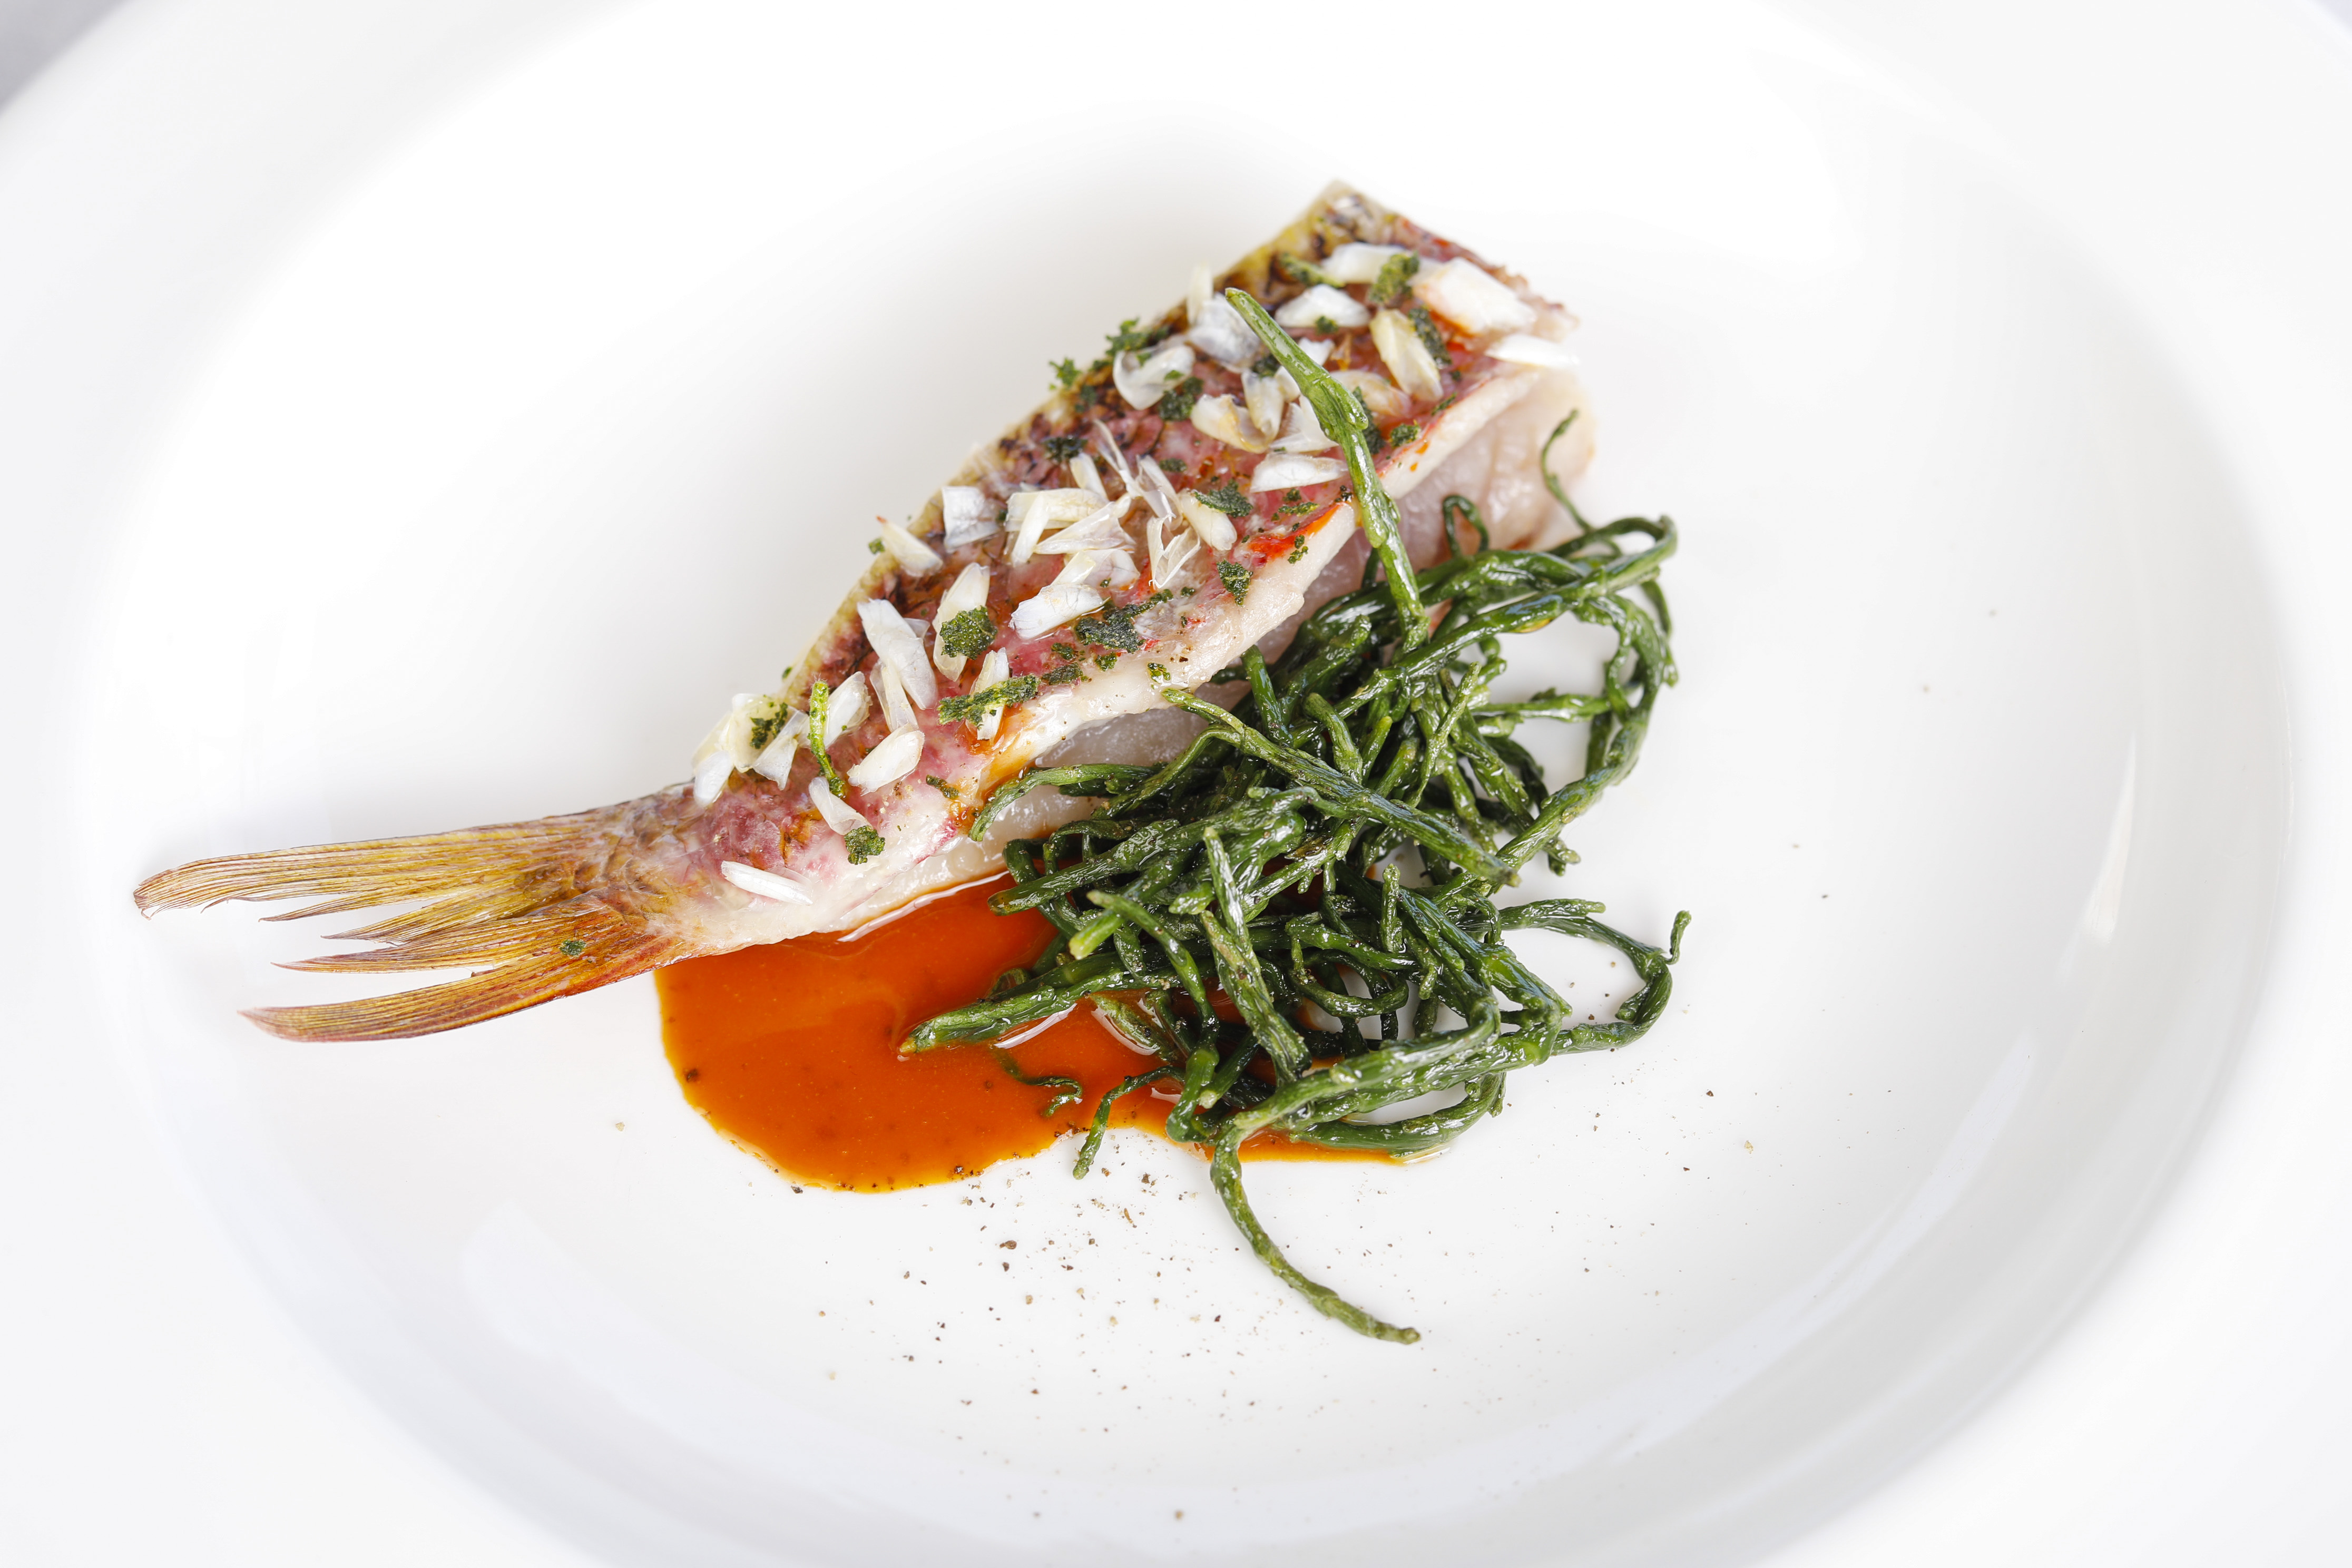 Mullet with its offal and Cacciucco Sauce, Salicornia, Oil and Lemon